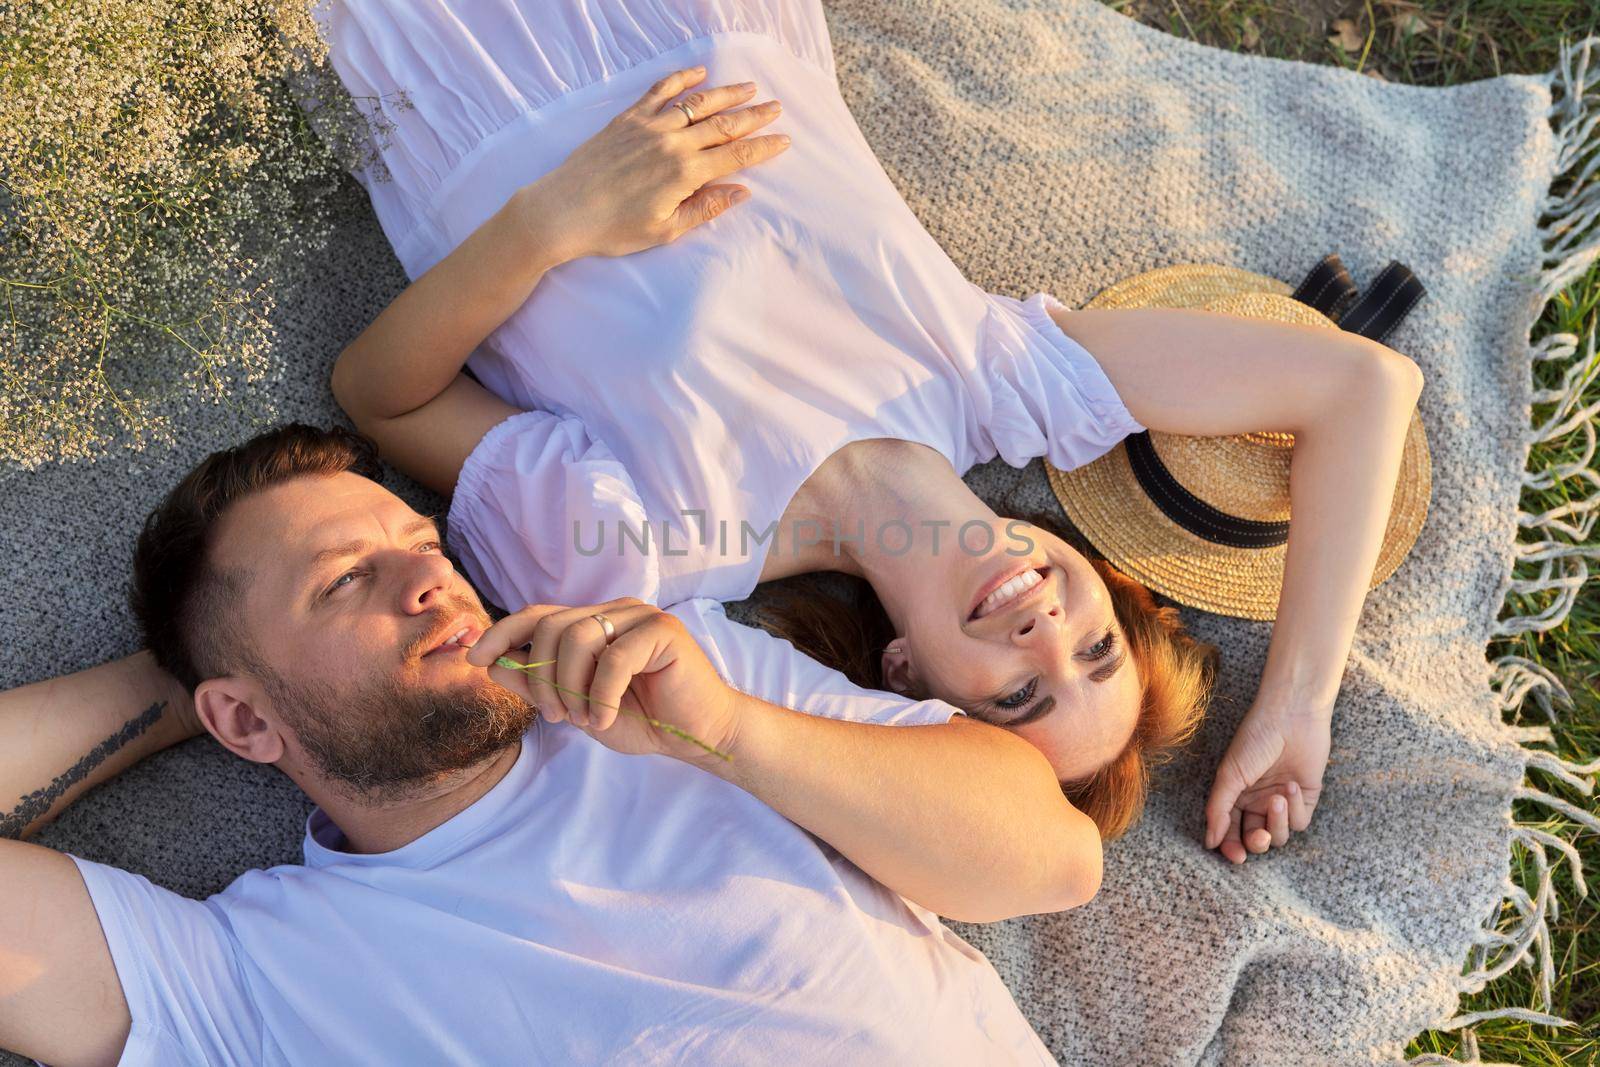 Happy romantic middle aged couple, top view on smiling faces lying on blanket, in sunny sunset light. Love, relationships, date, family, lifestyle, people 30s 40s age concept